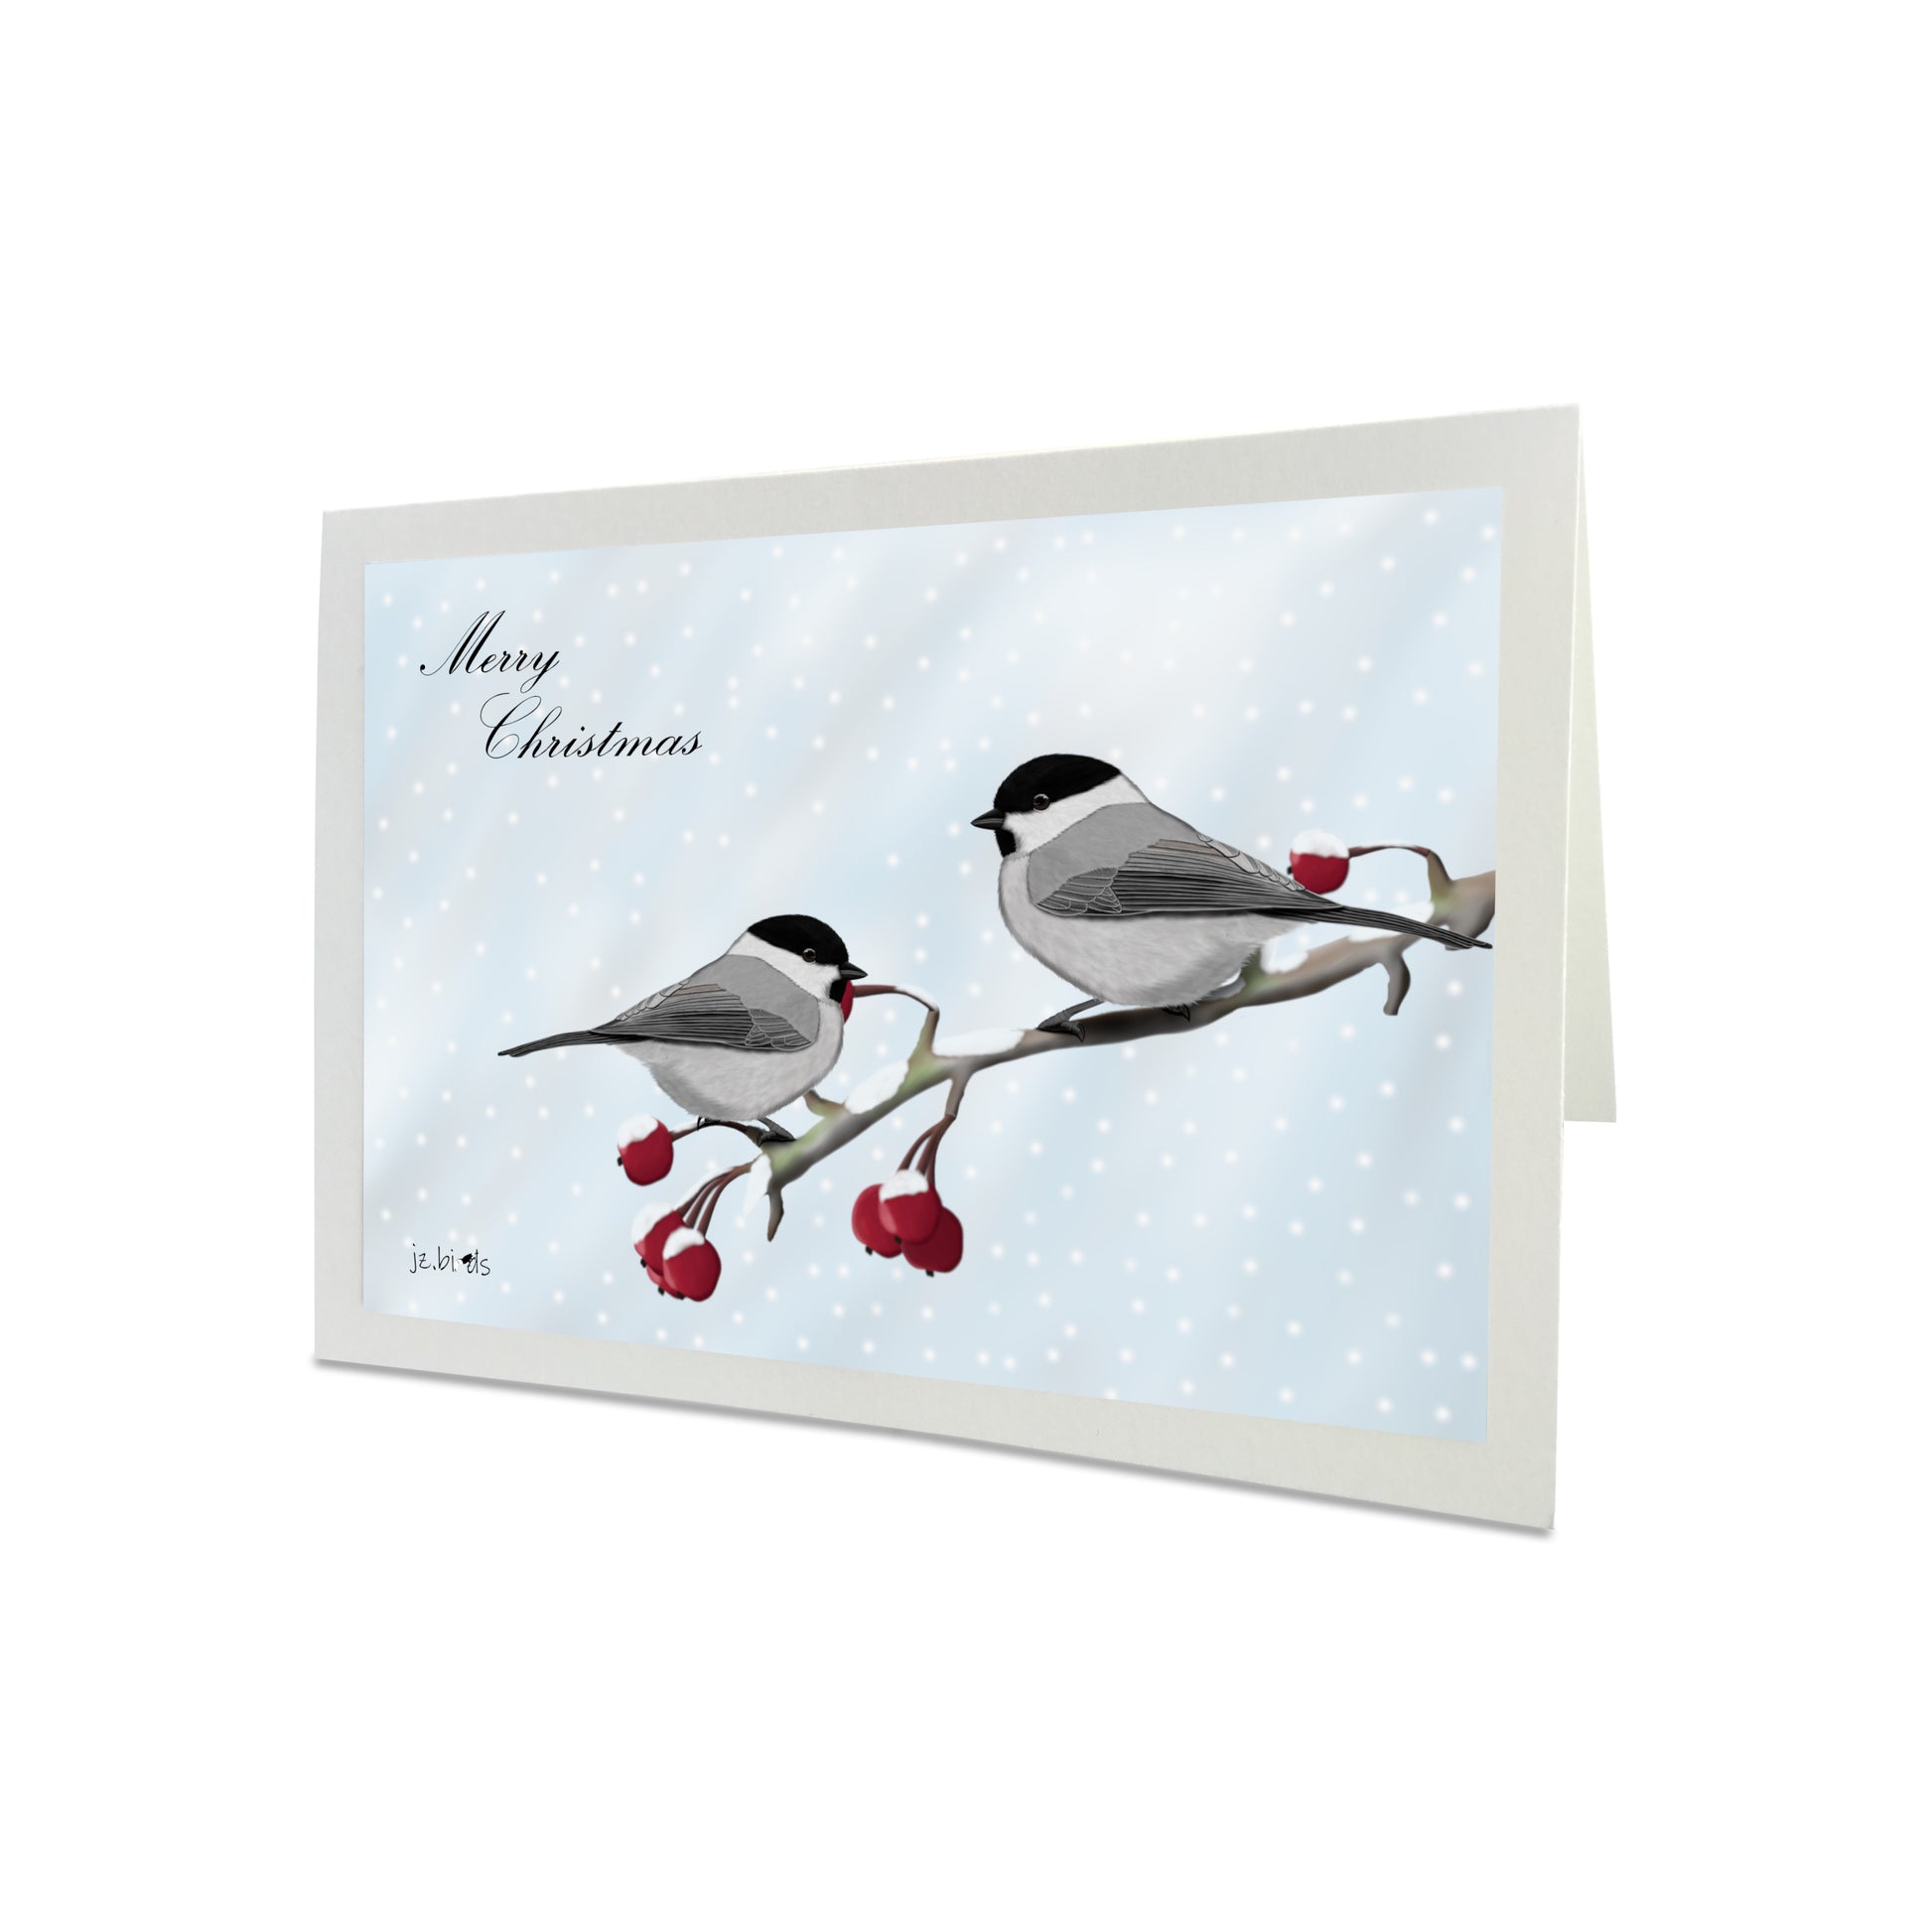 Willow Titmice Birds on a Winter Branch Merry Christmas Card